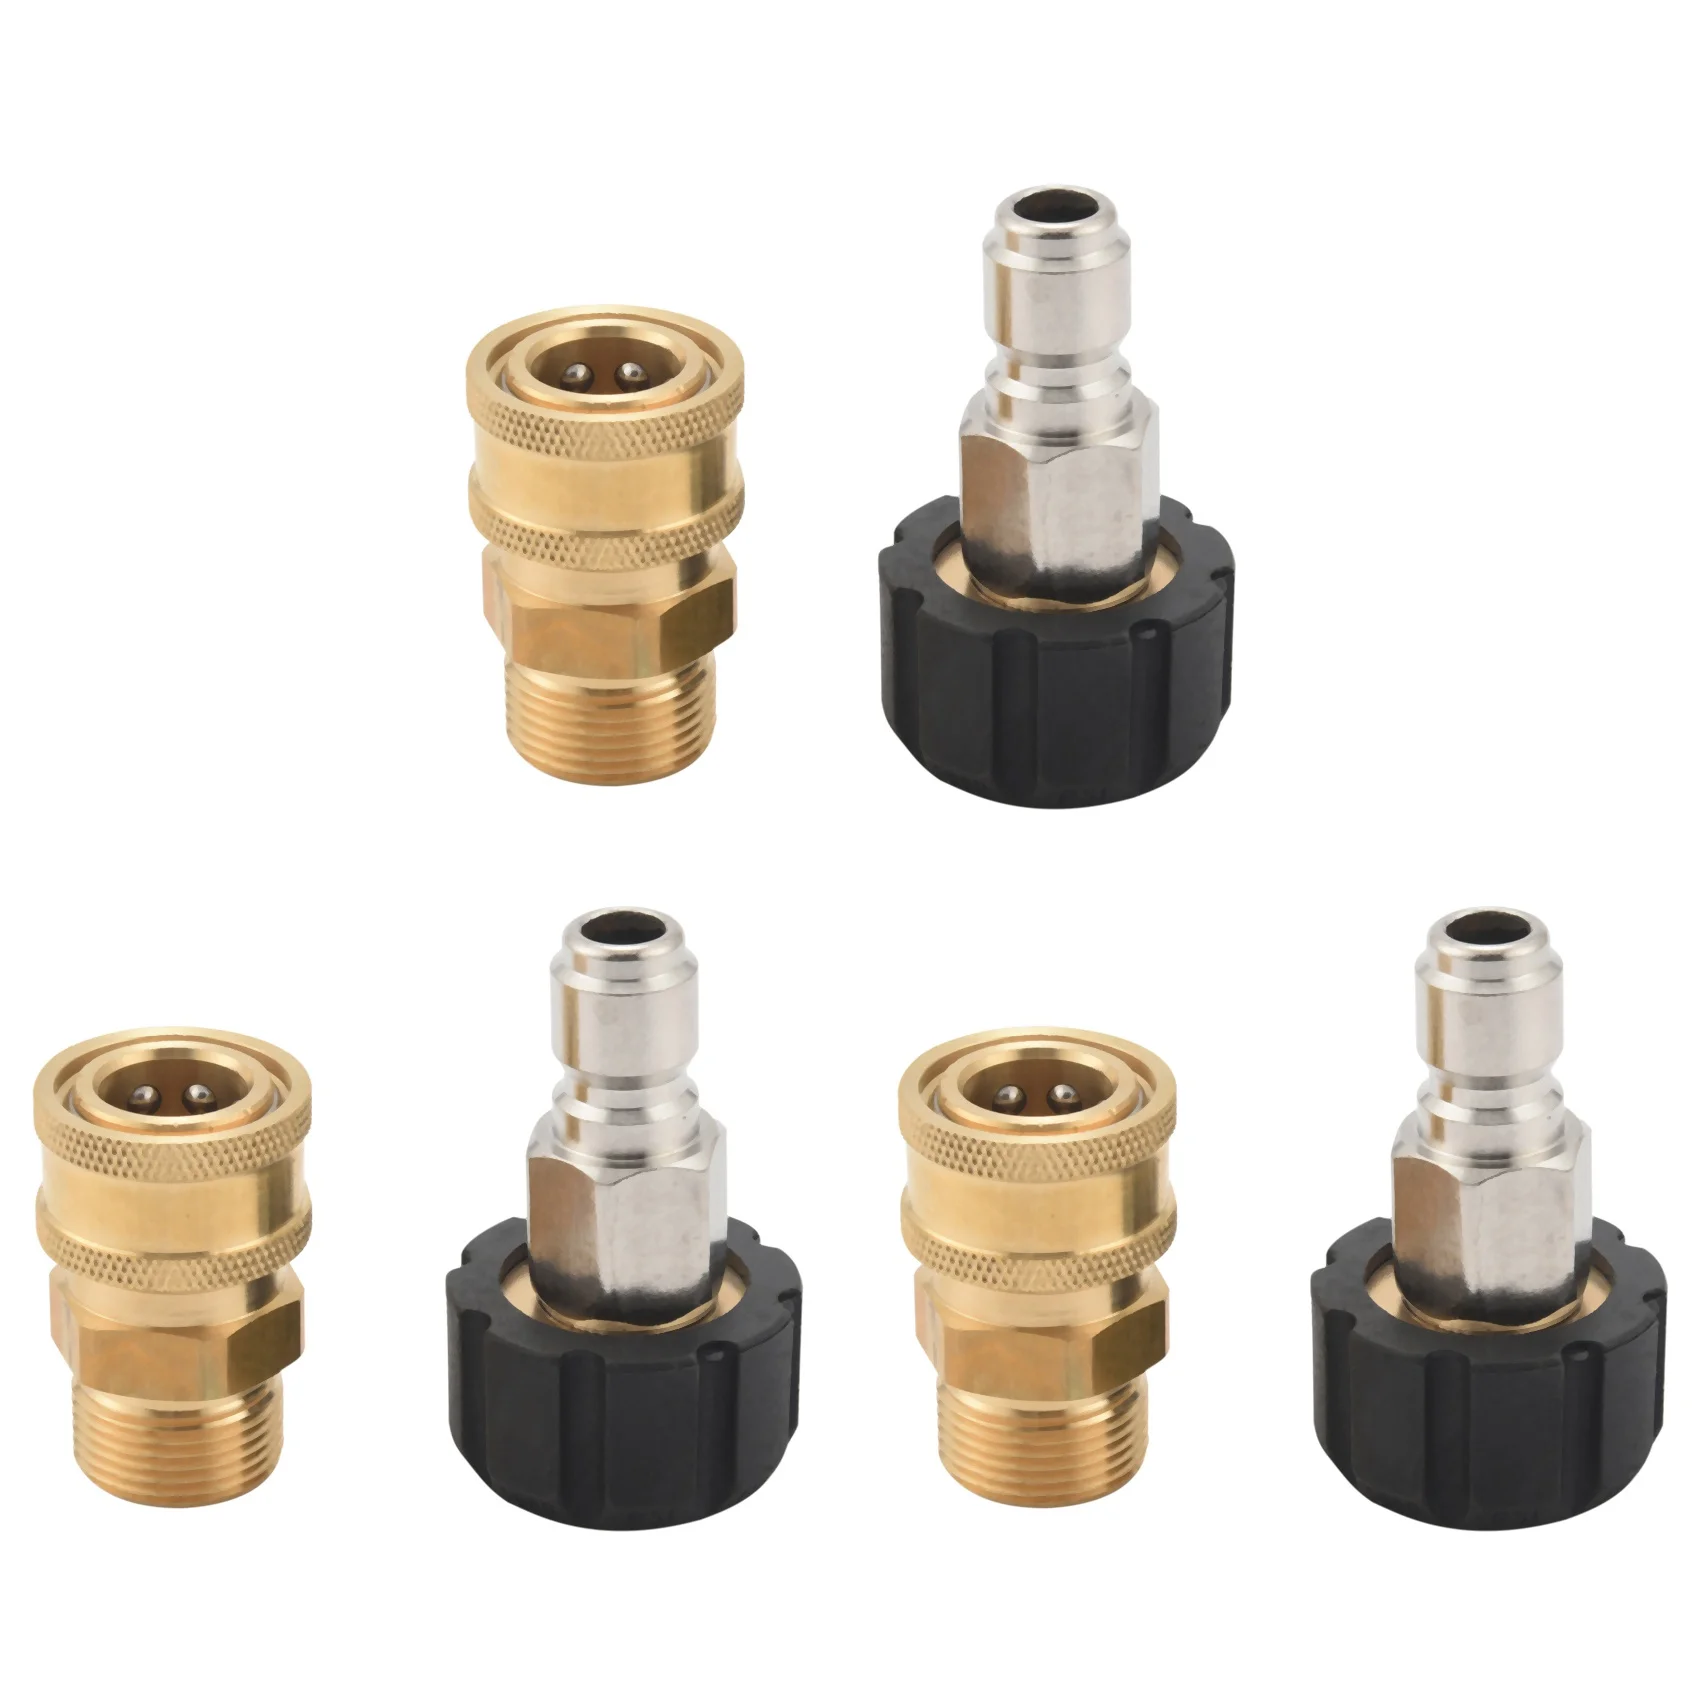 

6X Pressure Washer Adapter Set, Quick Connect Kit, Metric M22 15mm Female Swivel to M22 Male Fitting, 5000 Psi